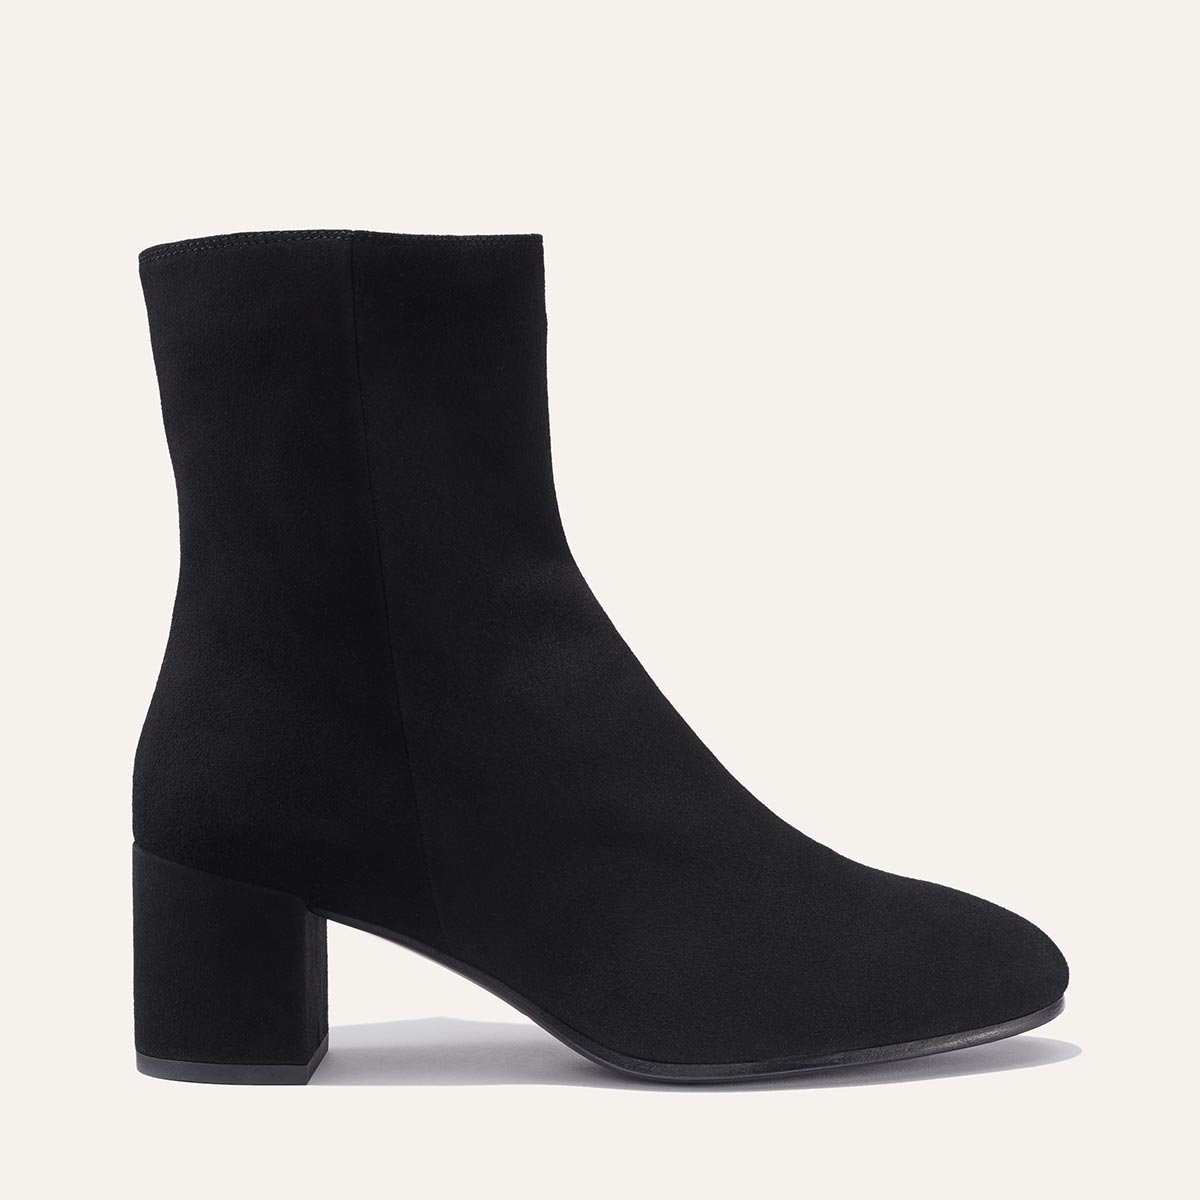 The Boot - Black Suede – Margaux